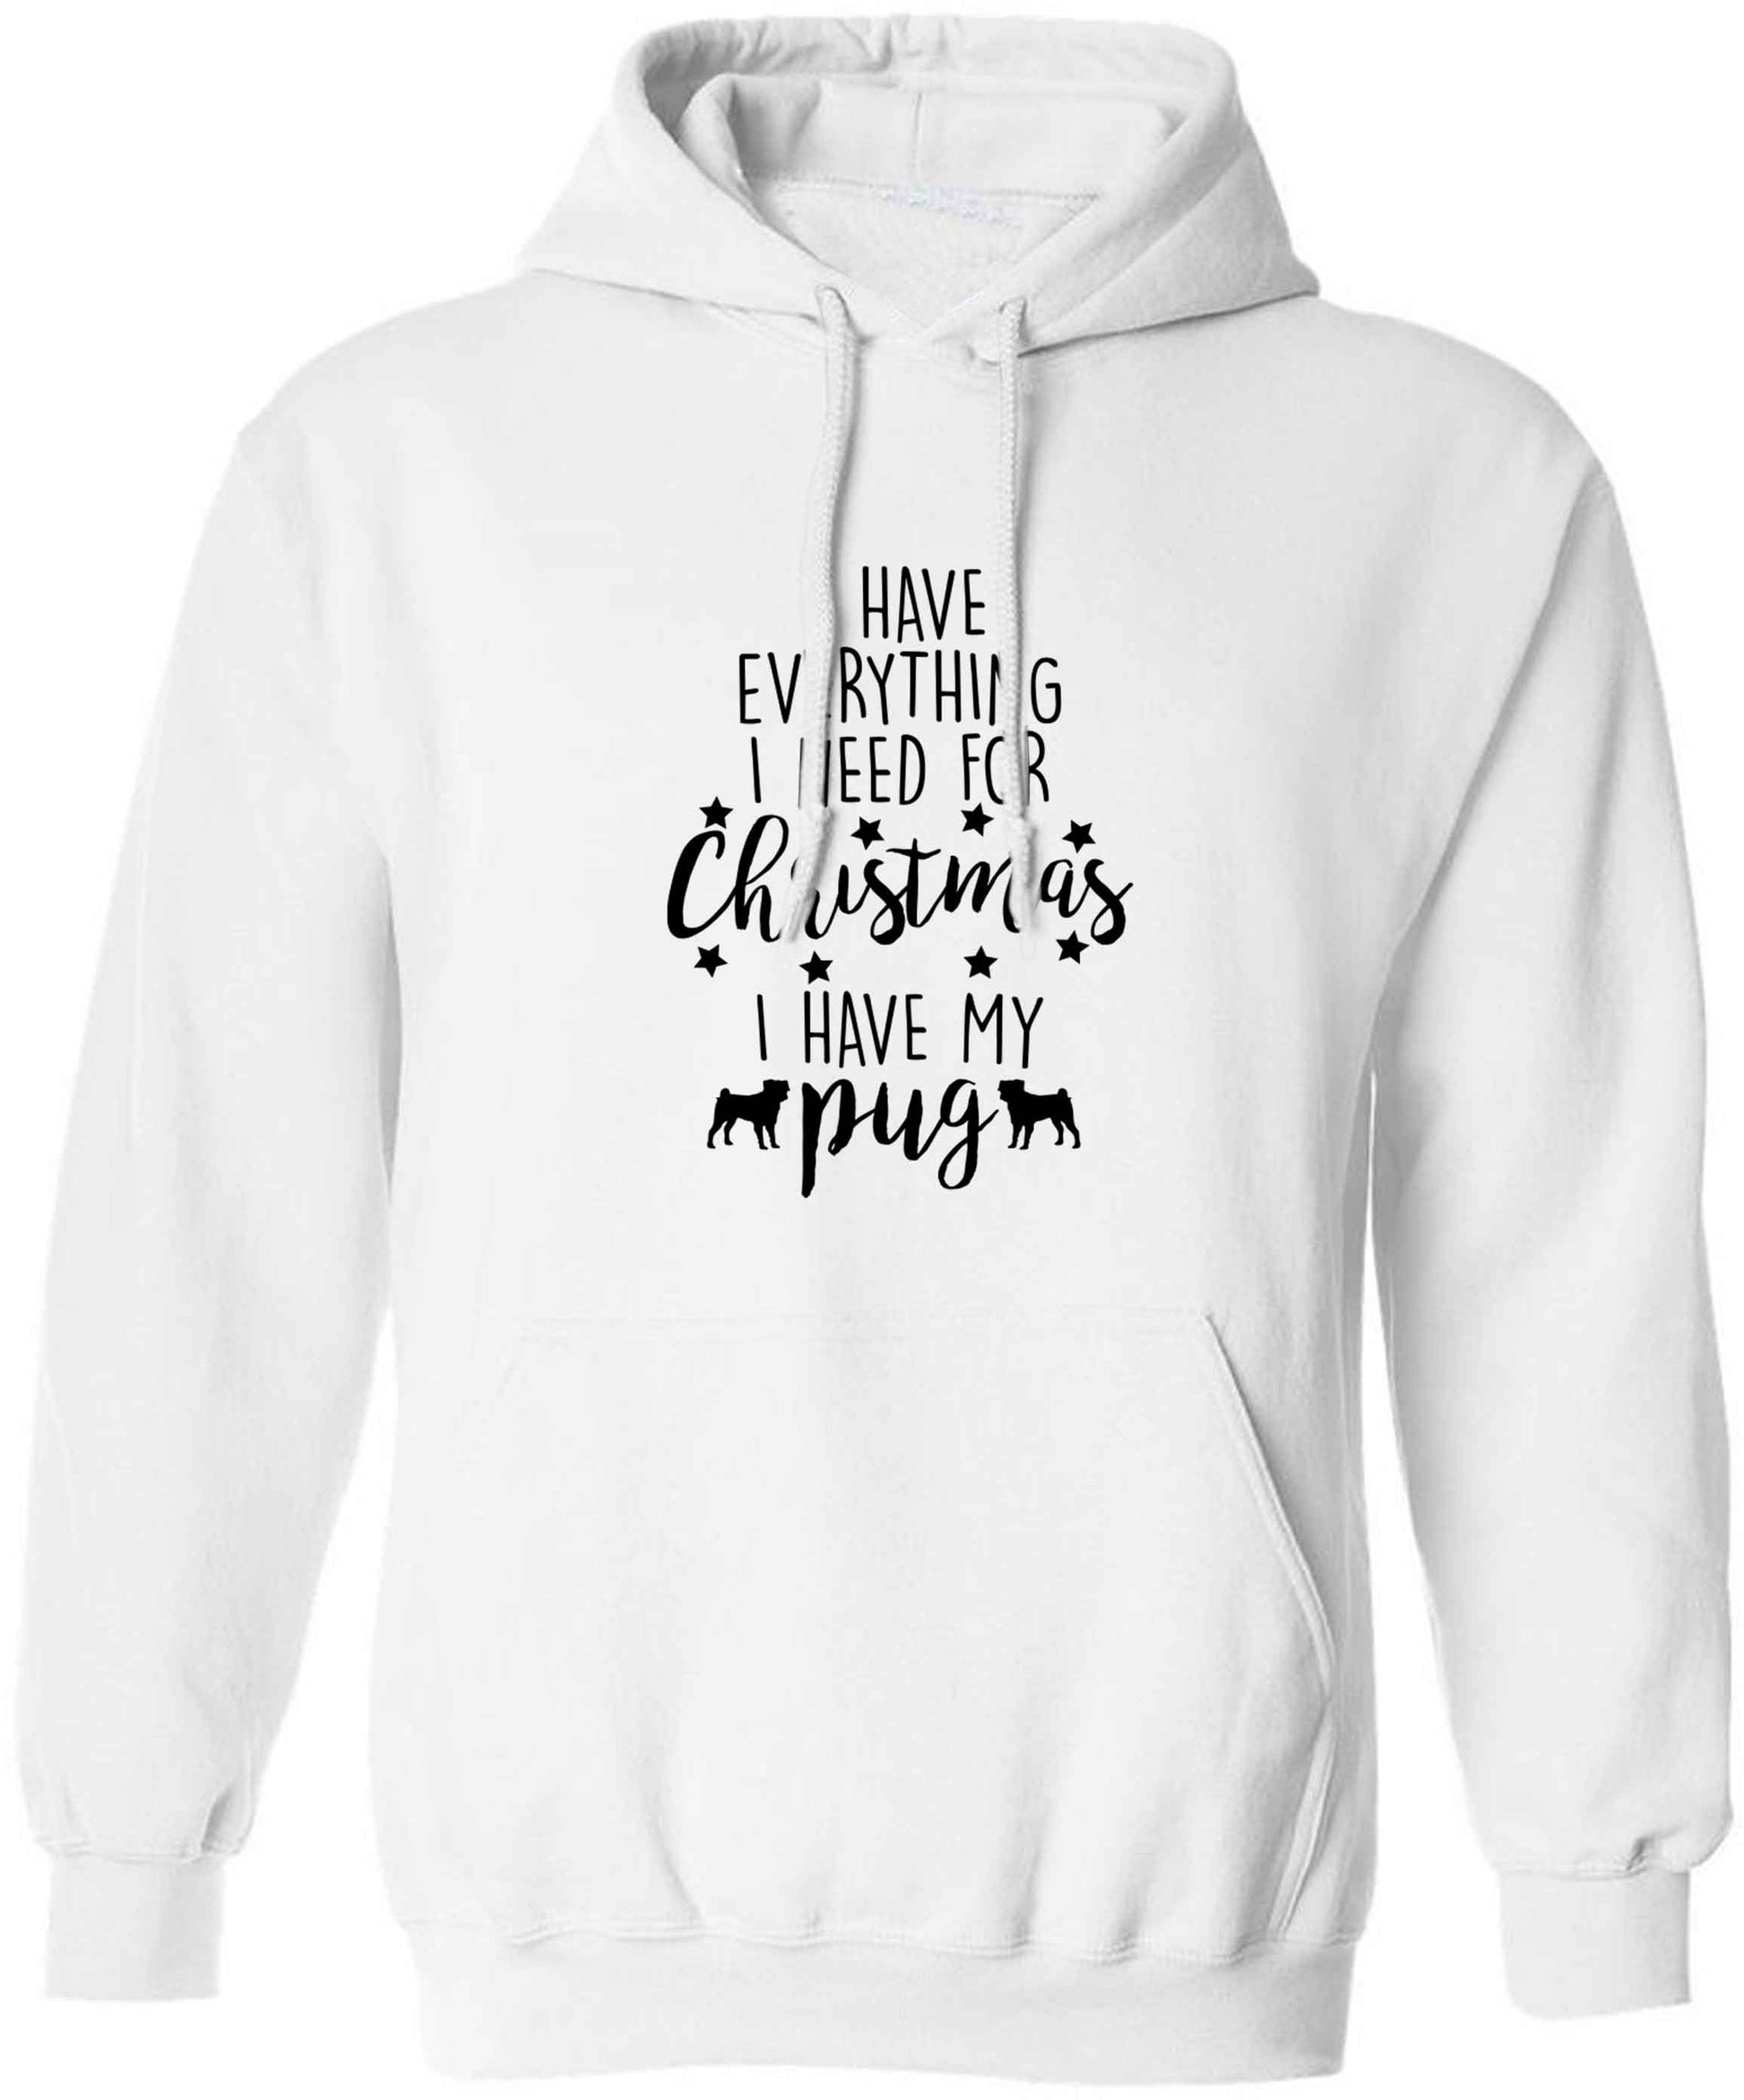 I have everything I need for Christmas I have my pug adults unisex white hoodie 2XL